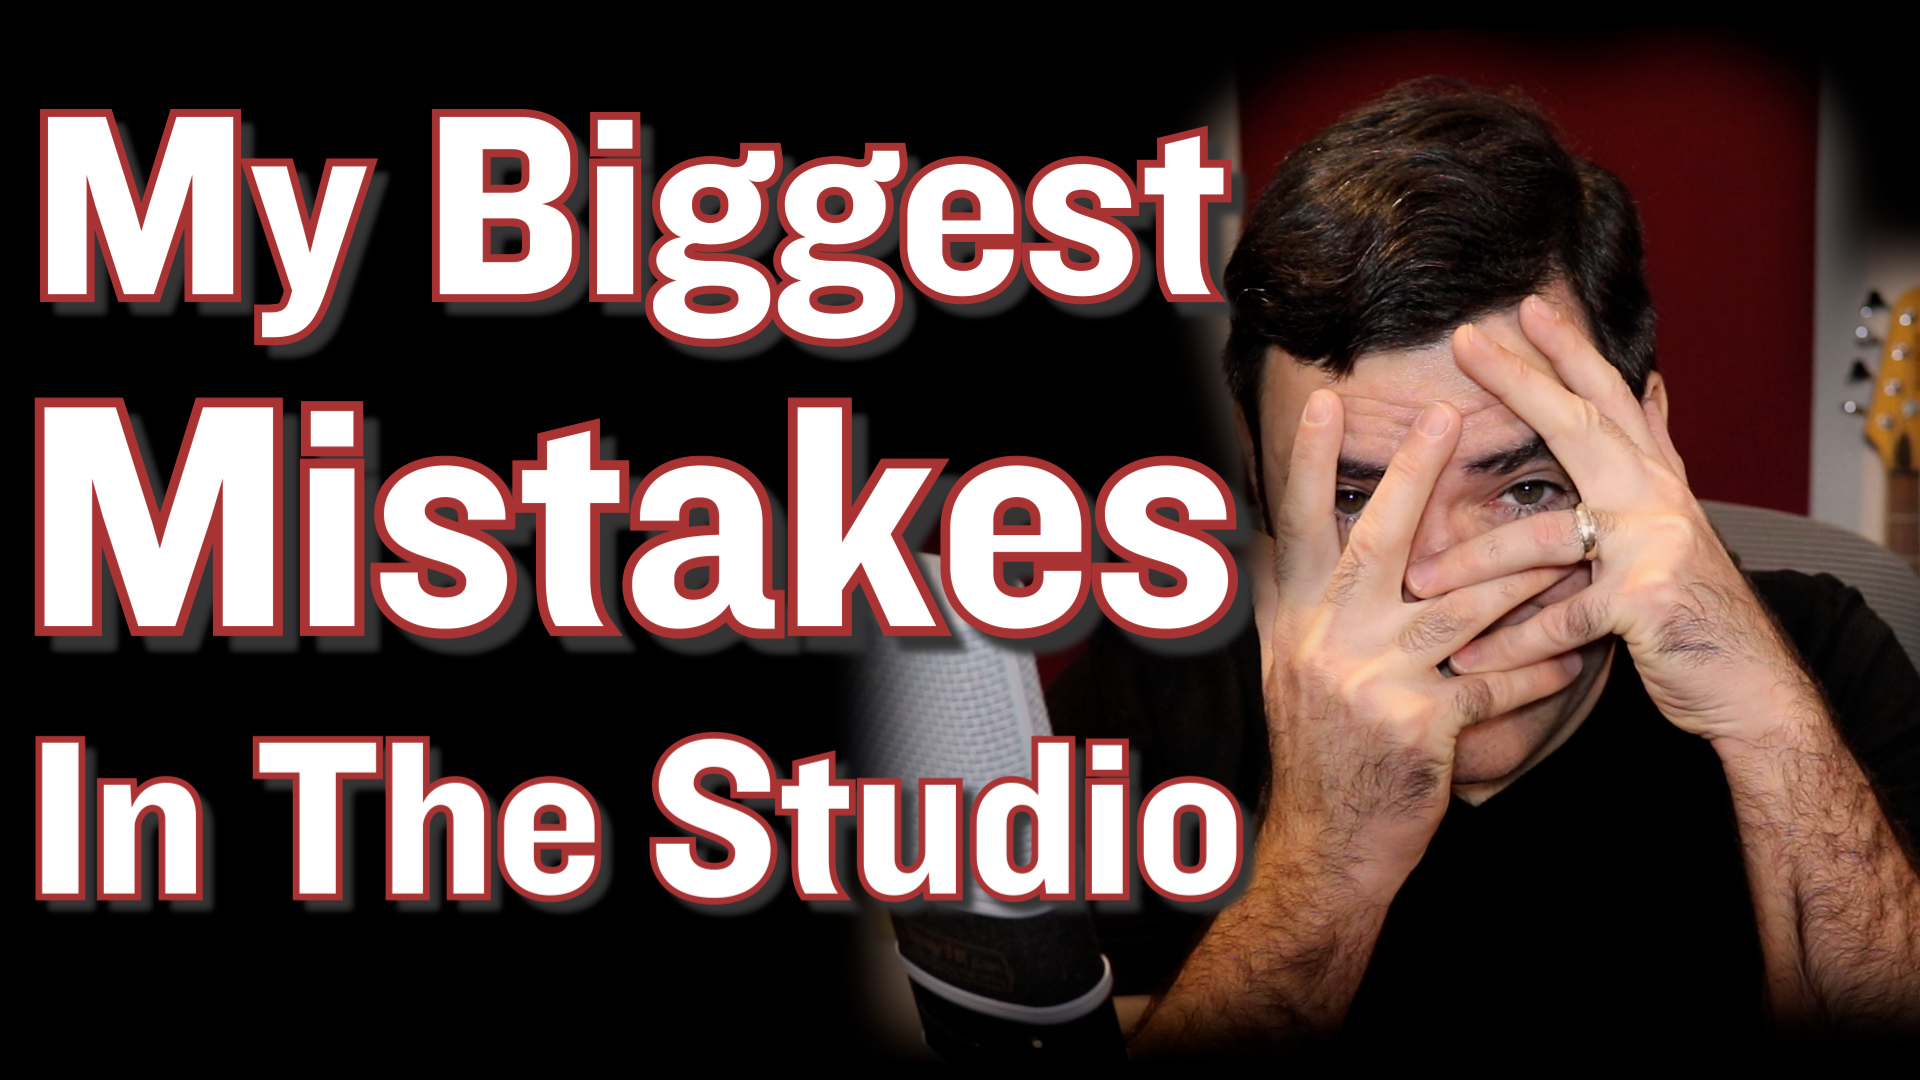 My Biggest Mistakes in the Studio